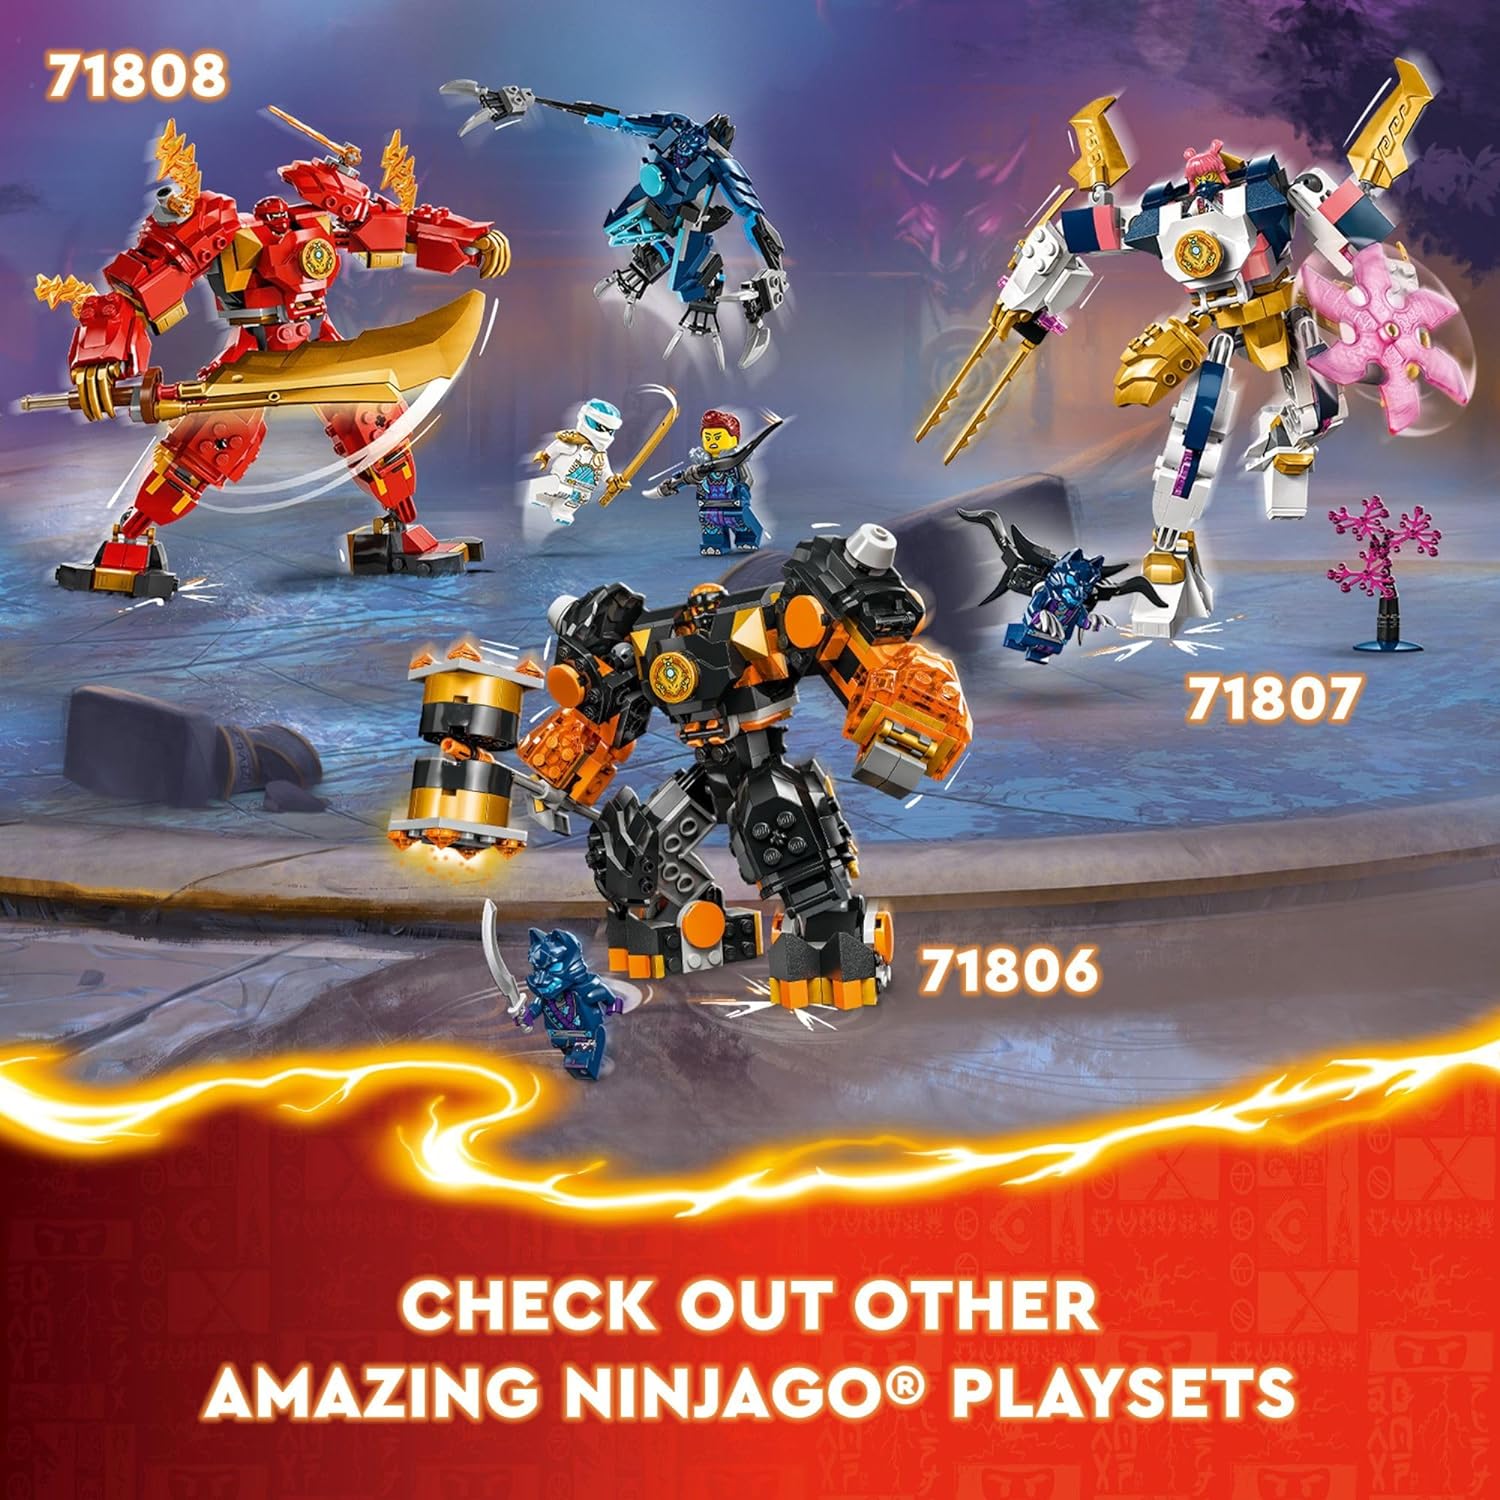 LEGO 71806 NINJAGO Cole’s Elemental Earth Mech Mini Ninja Toy, Customizable Action Figure Adventure Toy with Cole and Wolf Warrior Minifigures, Ninja Gift for Boys, Girls and Kids Ages 7 and Up,